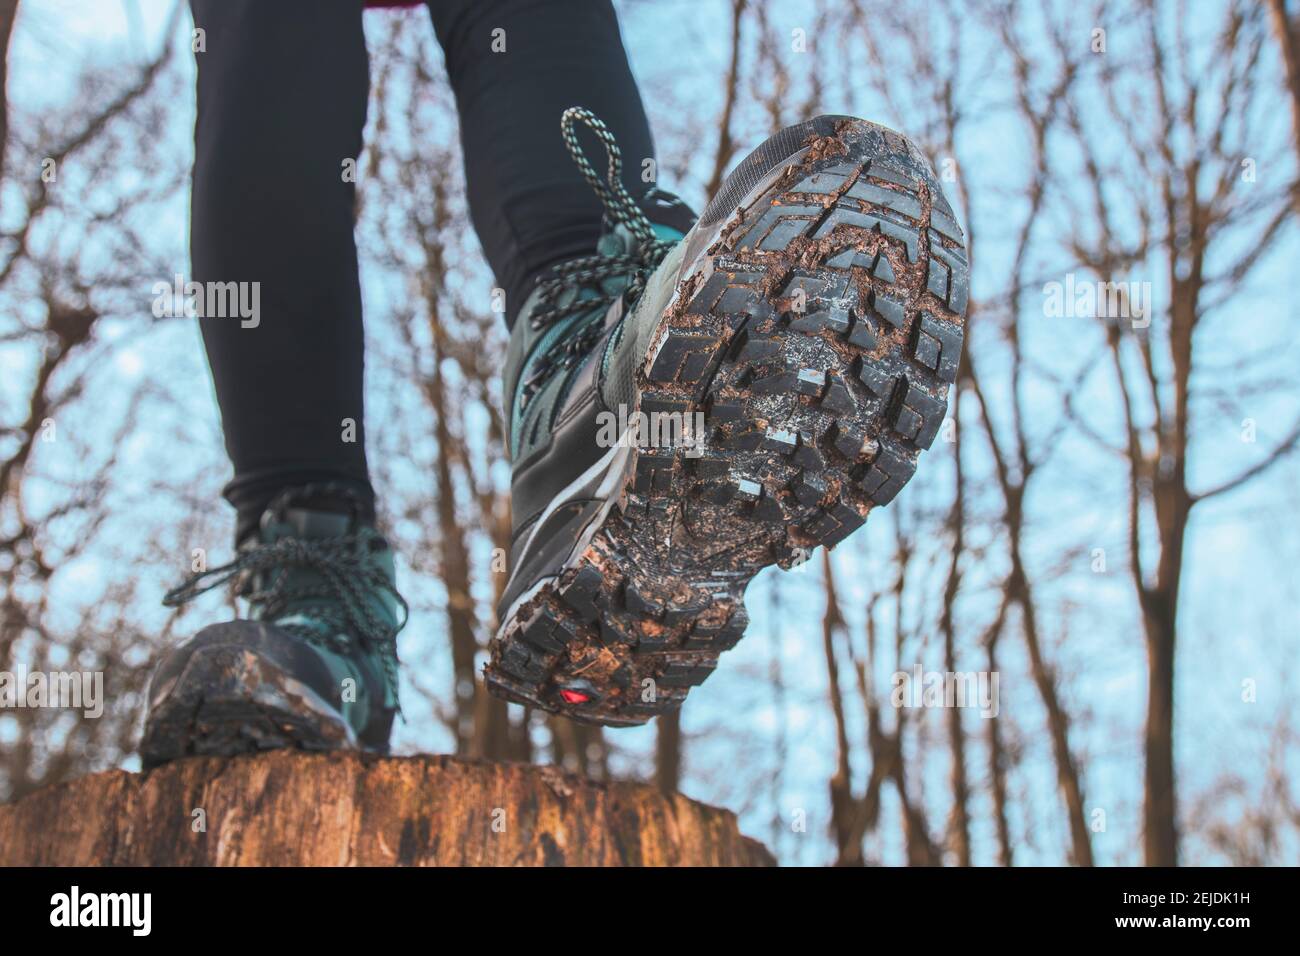 Close up view from underneath of hiking boots being worn on a forest trail as the hiker takes a step over Stock Photo